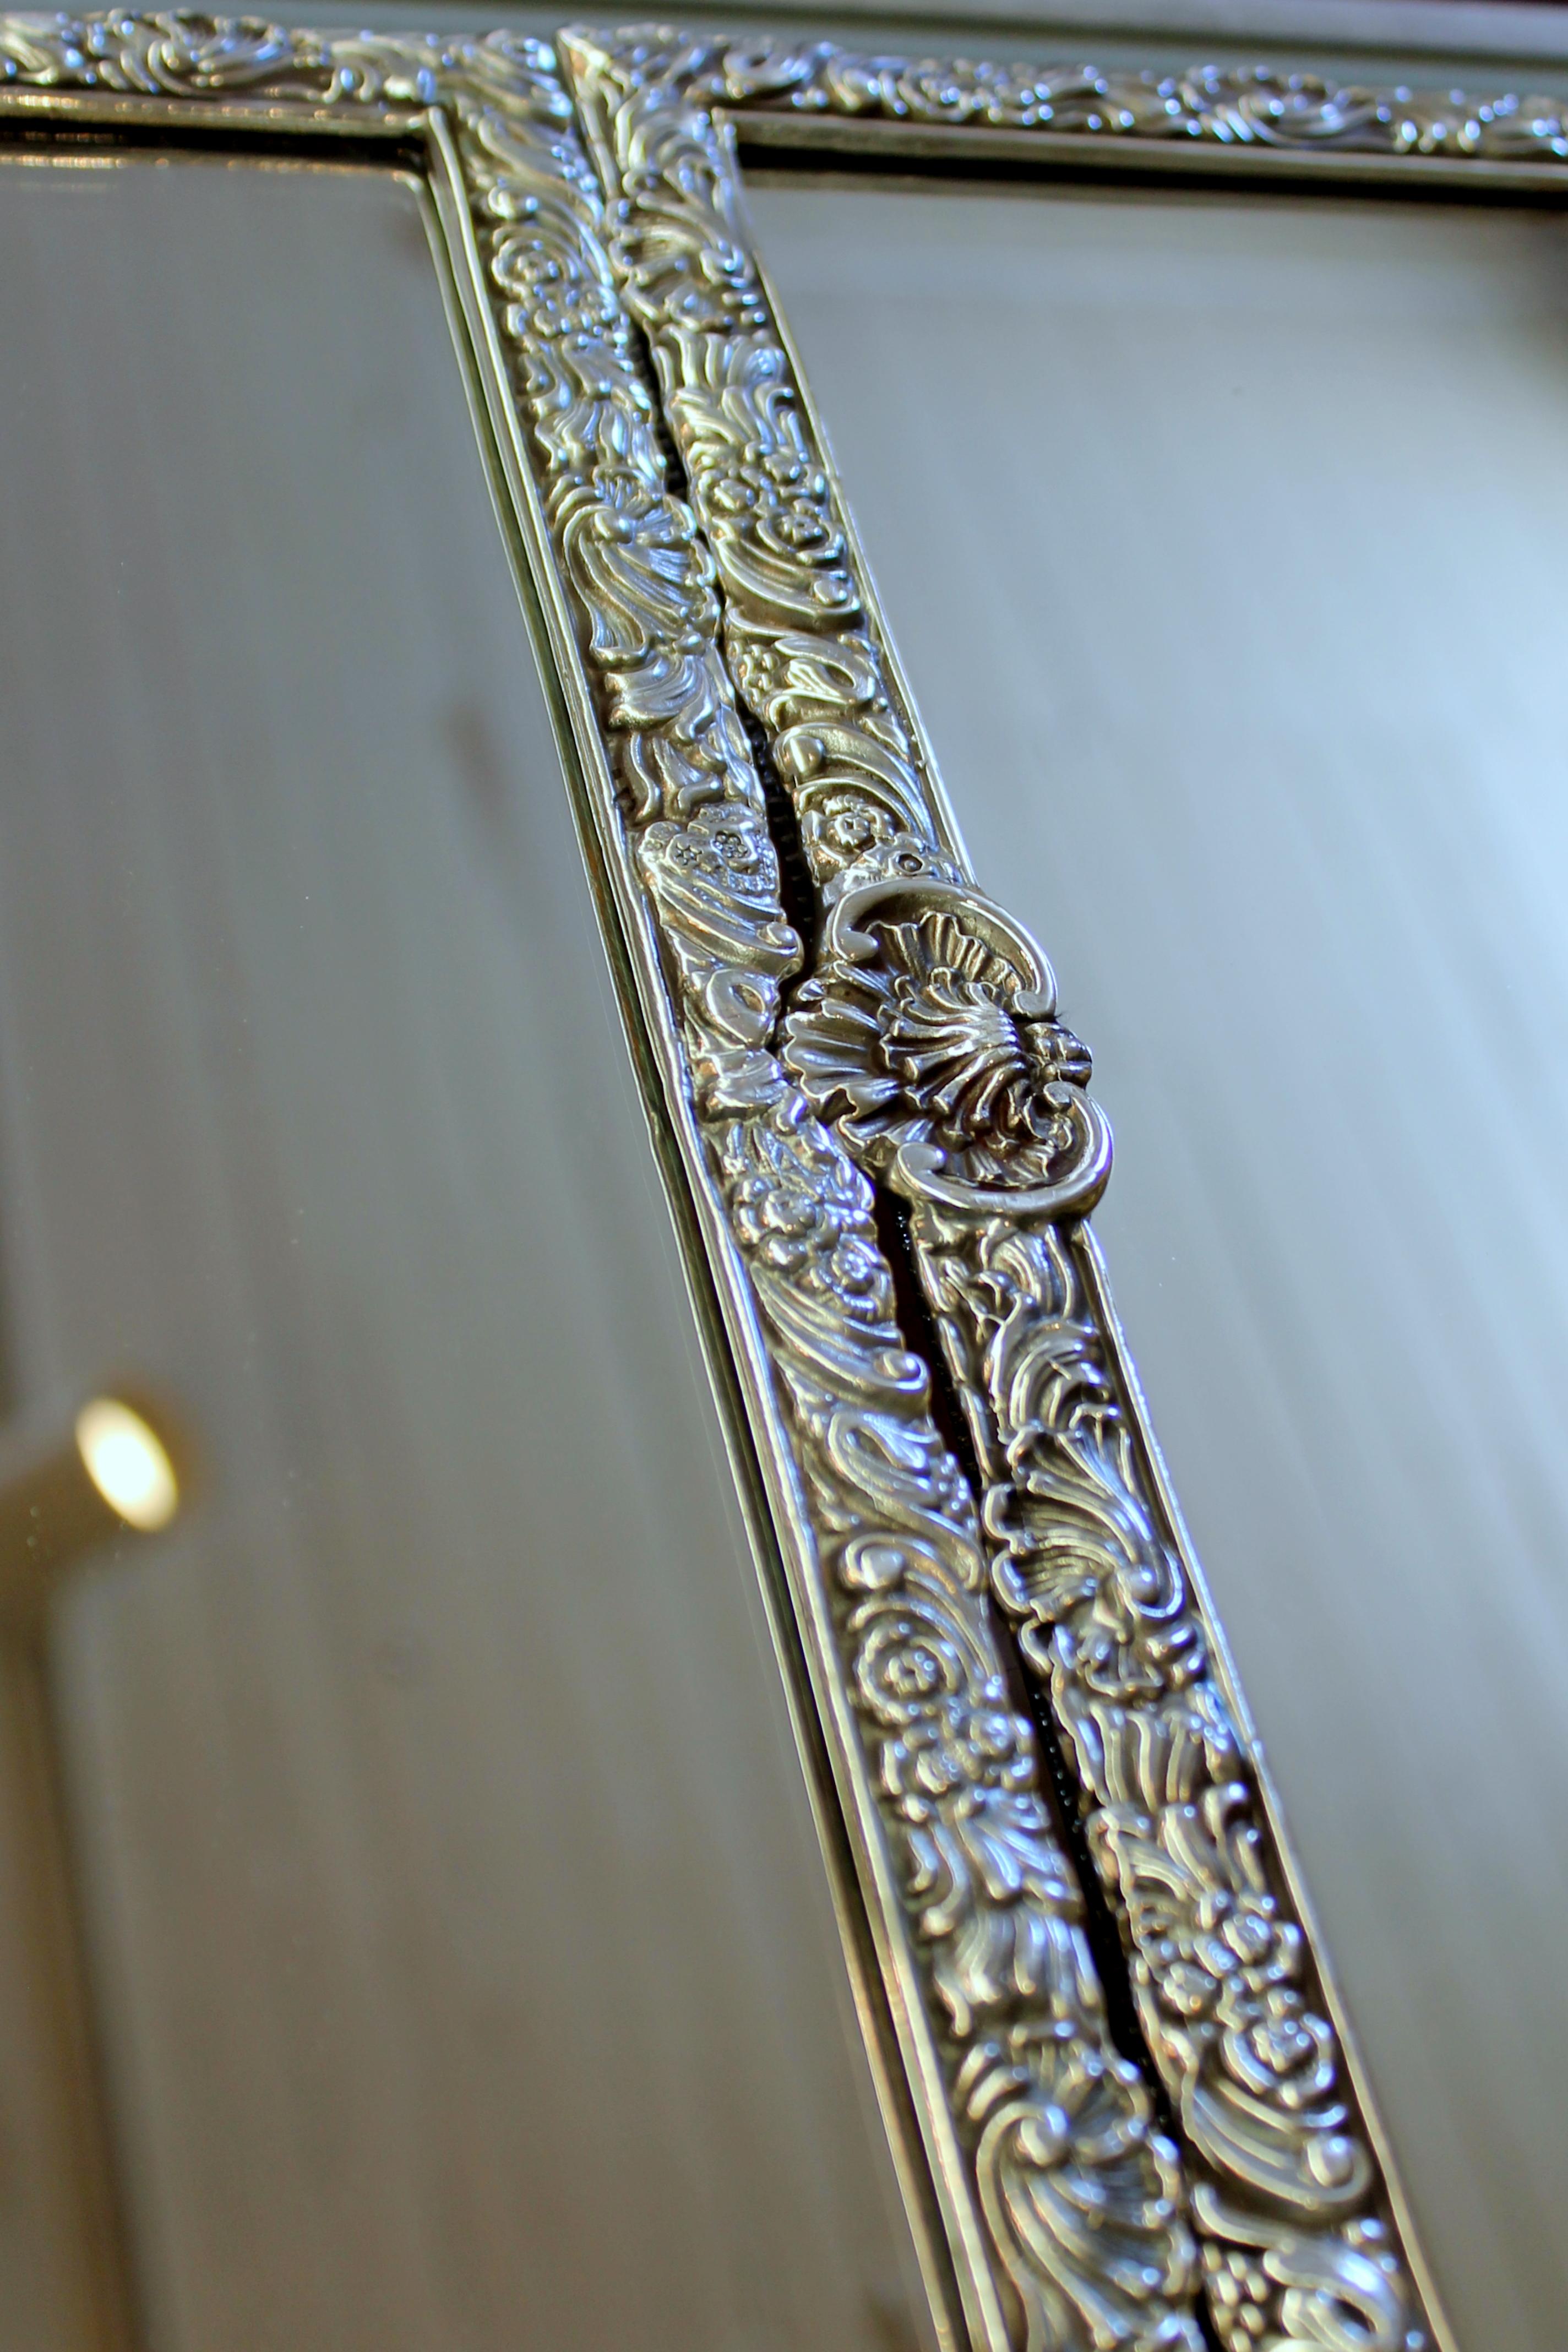 Hand-Crafted English Sheffield Silver Plate Repro, Rococo Style Three-Section Mirror Plateau